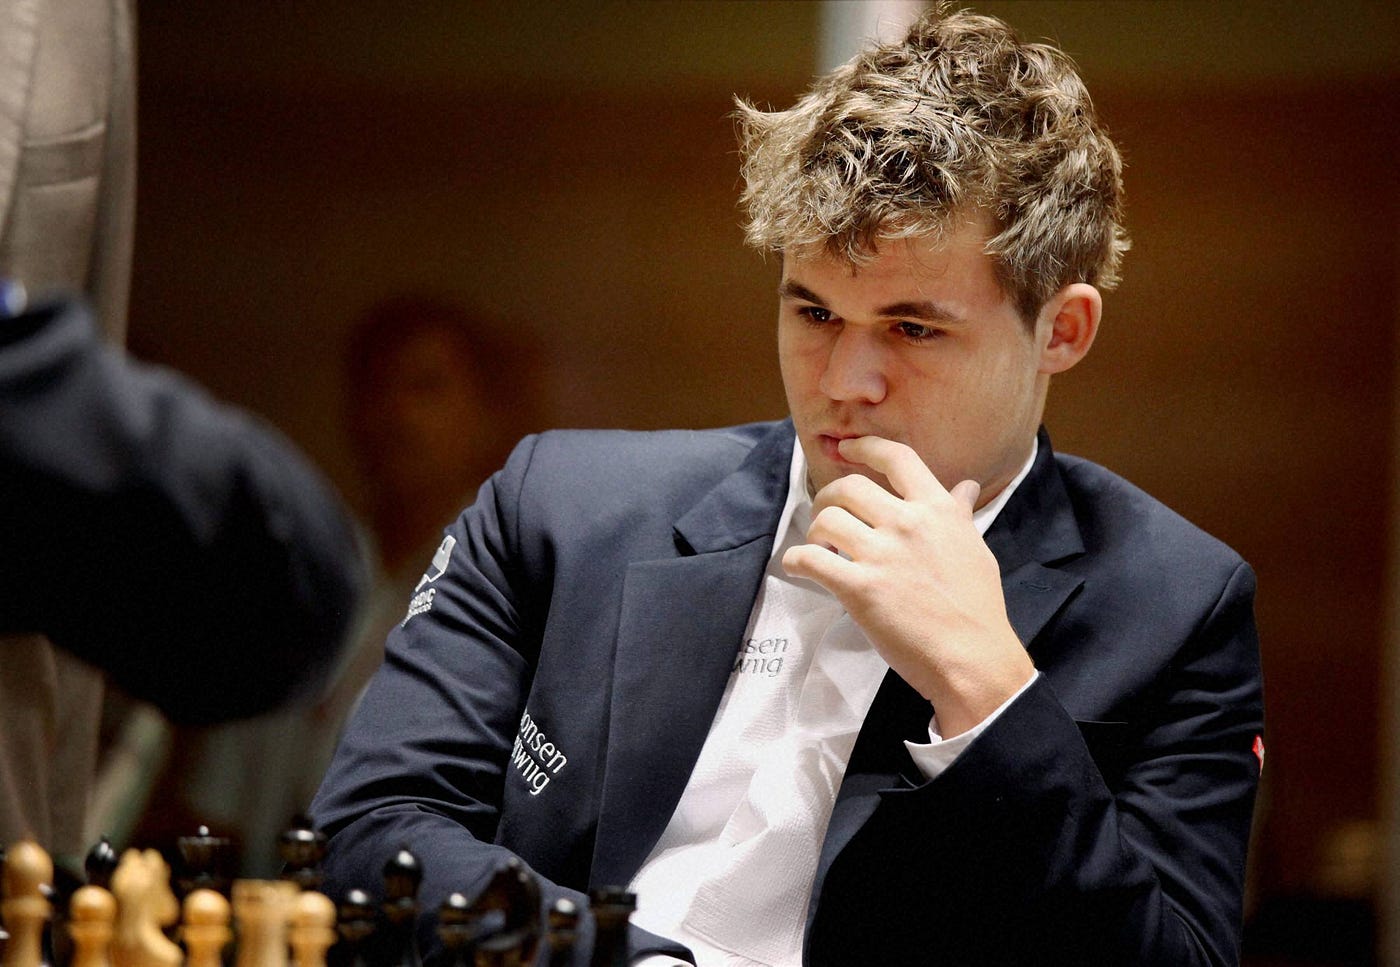 Ronaldo-Messi photo: The chess position in the picture is from a Magnus  Carlsen vs Hikaru Nakamura game-Sports News , Firstpost